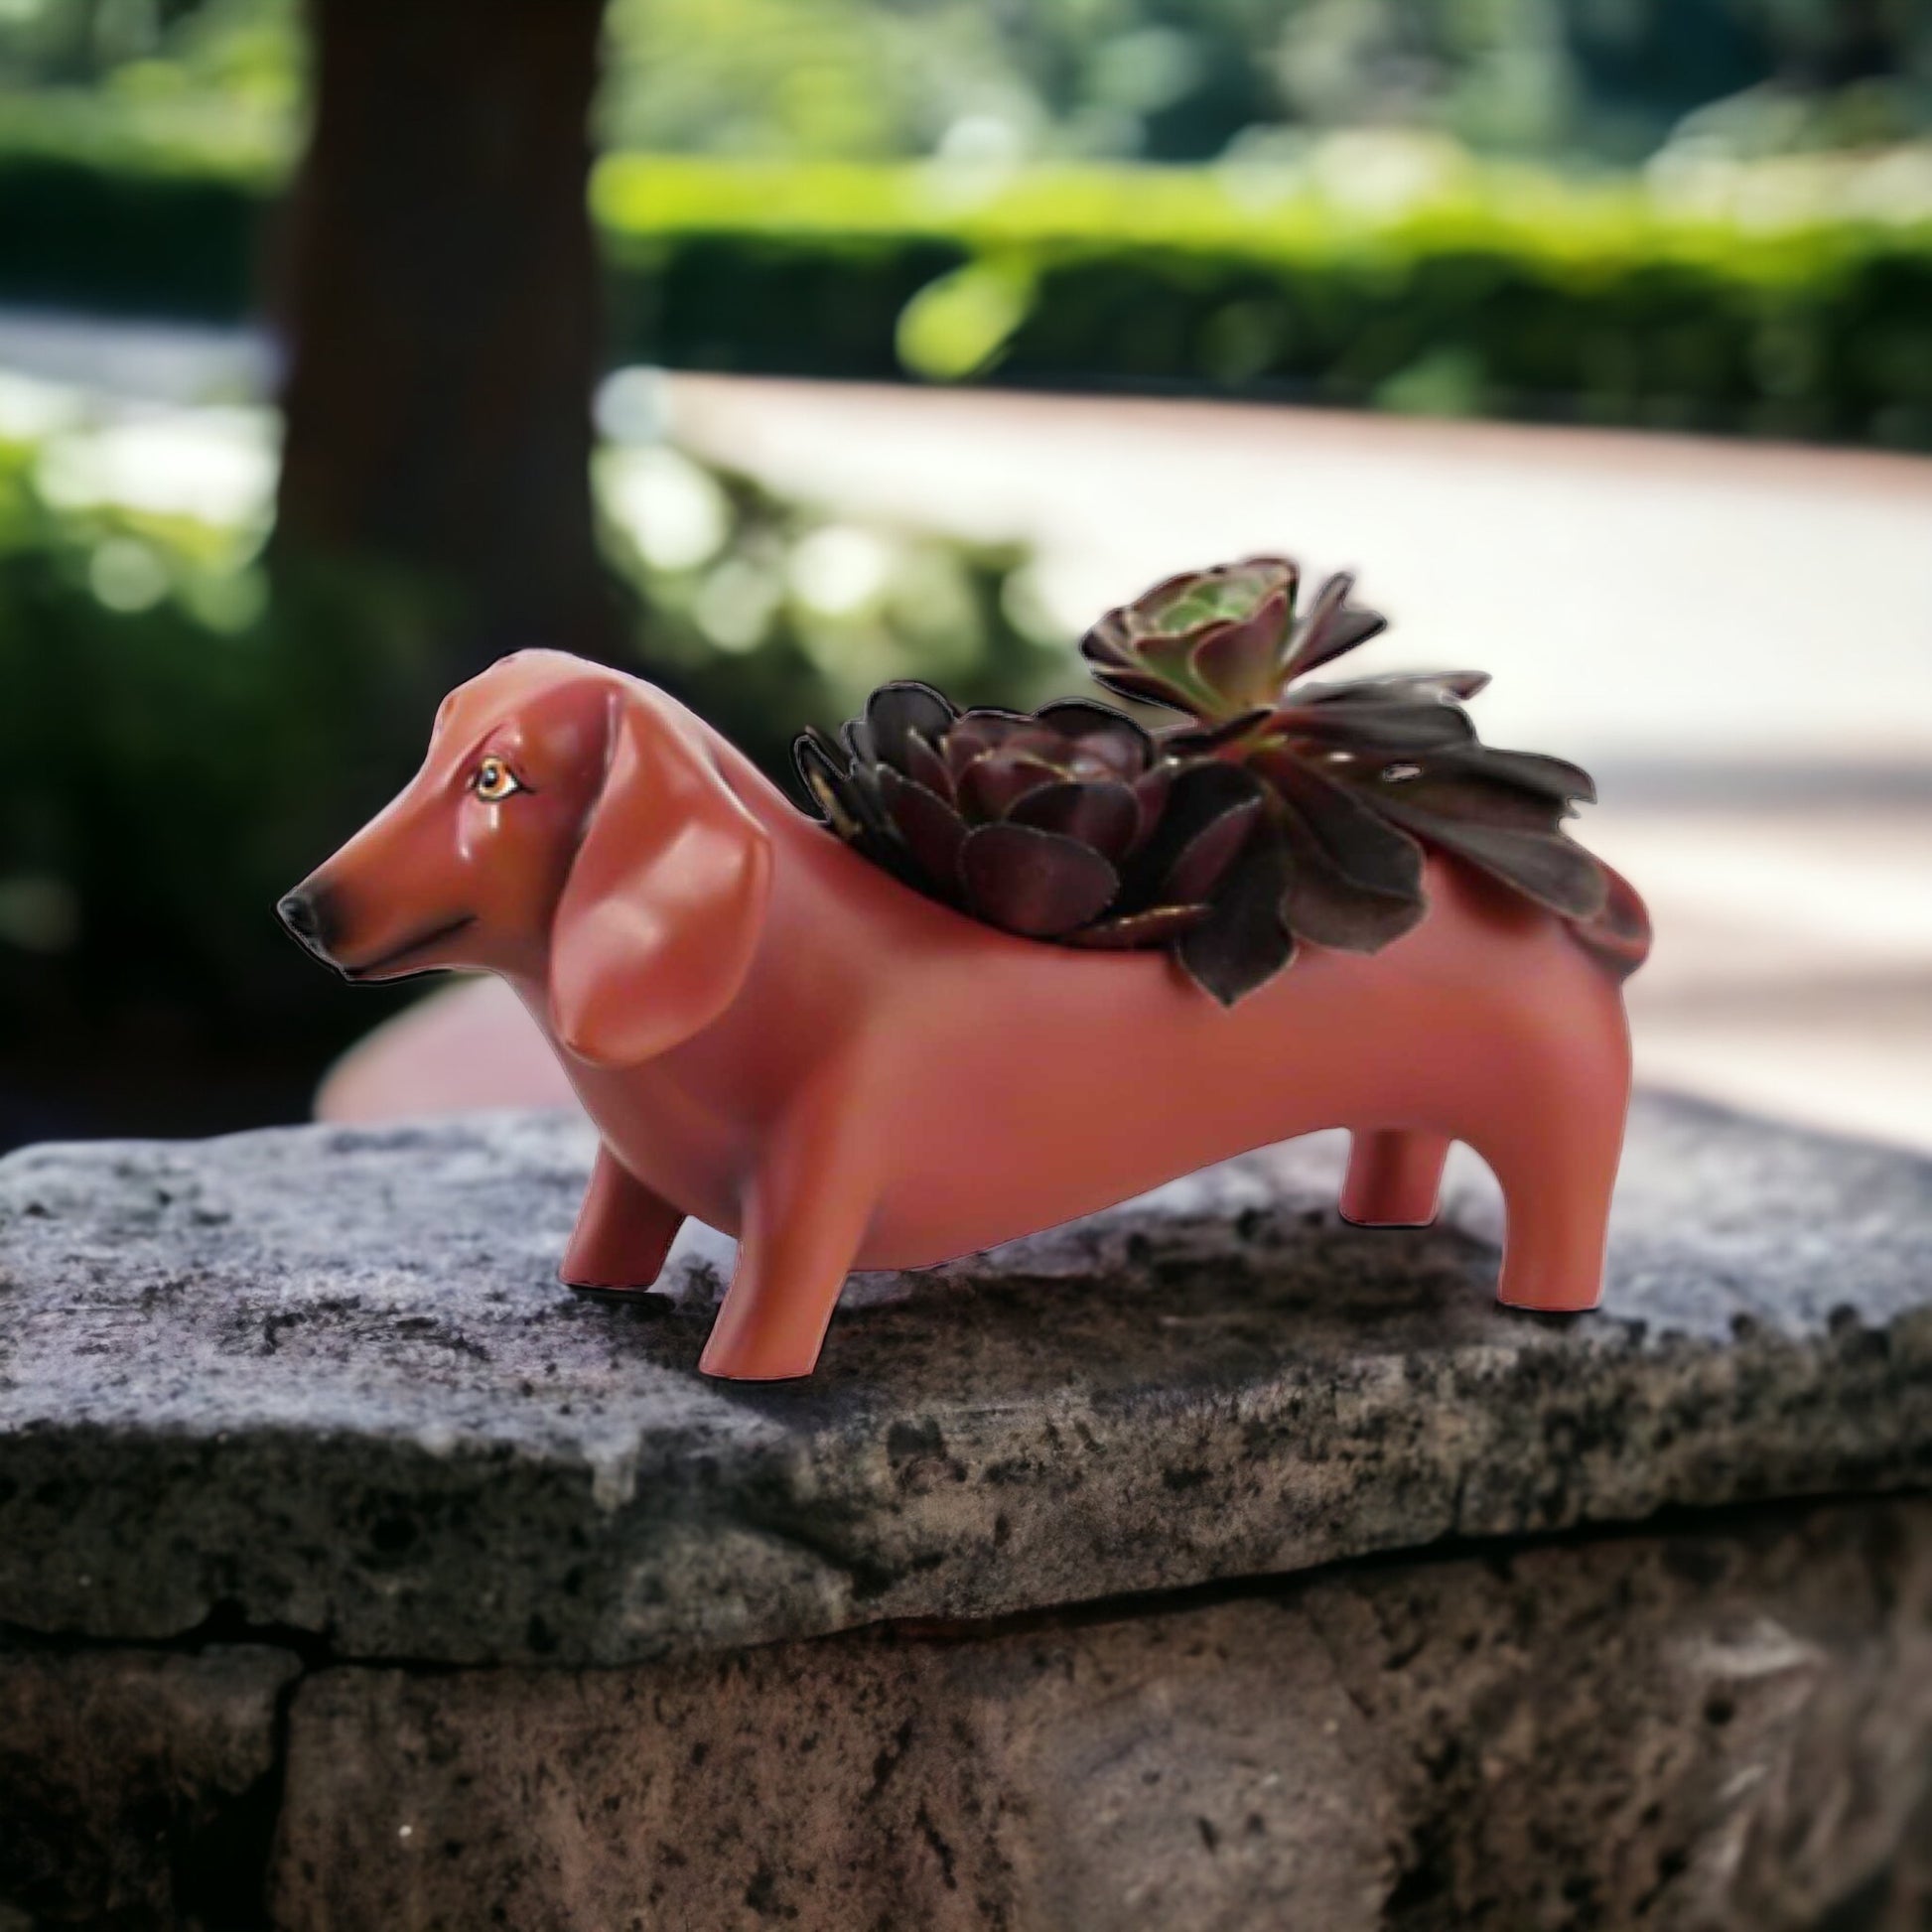 Dachshund Dog Tan Pot Planter Small - The Renmy Store Homewares & Gifts 